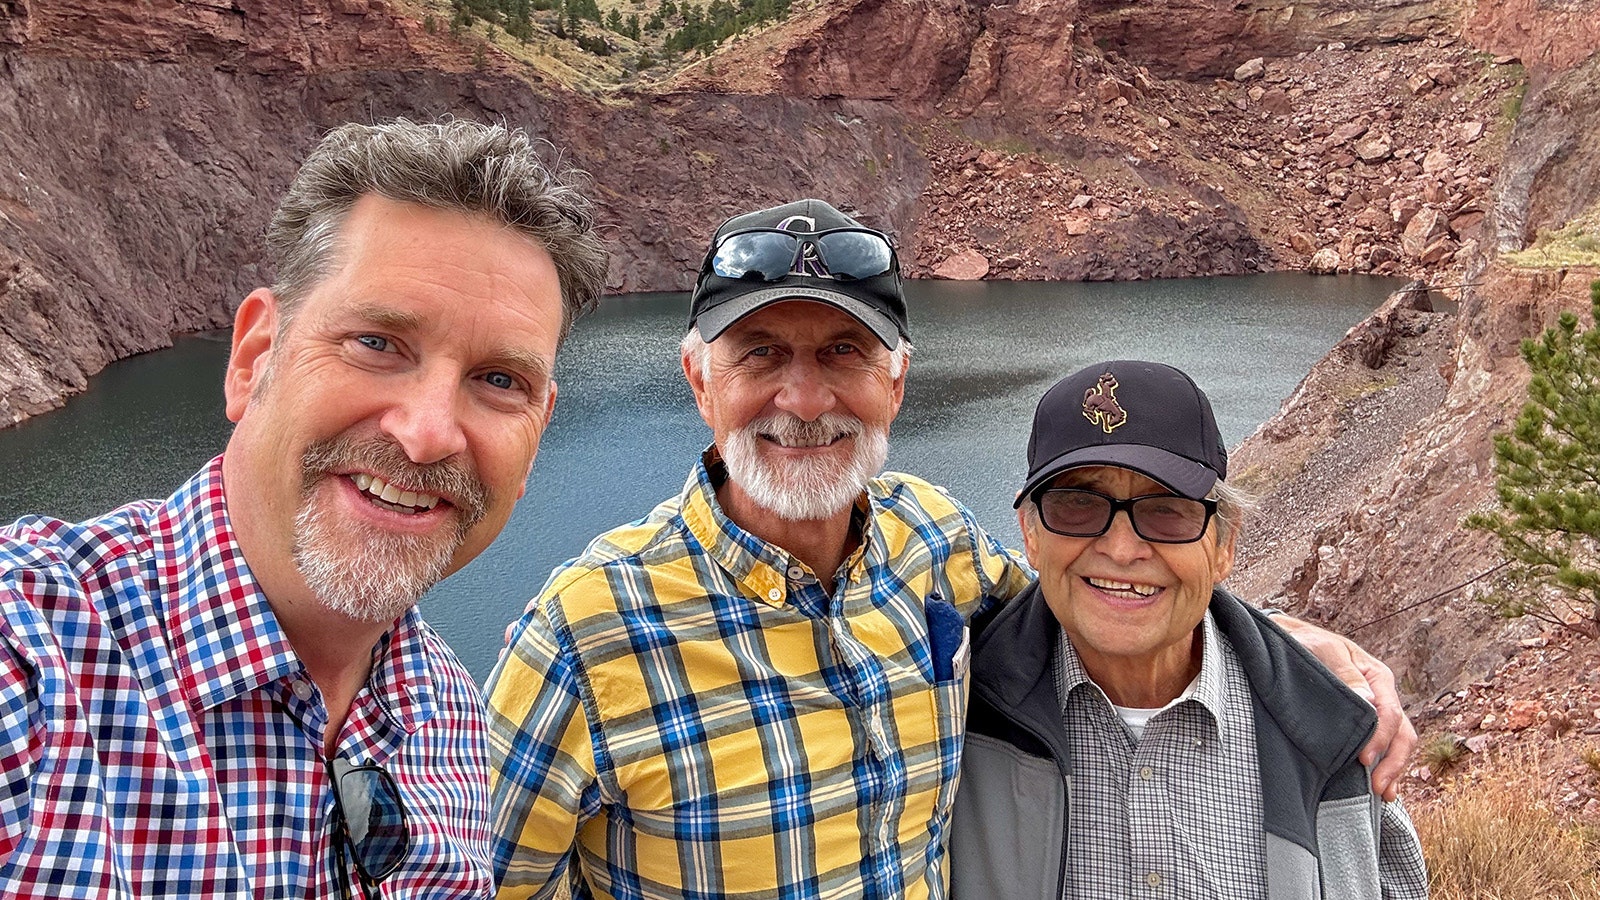 From left, Dave Walsh, John Voight and former Sunrise resident Ray Mansoldo pose in front of the water-filled glory hole at the abandoned mining town of Sunrise. Voight took Walsh on a tour of what remains of the town for research he's doing on his great grandfather Riccardo Severini's shooting death in 1910.